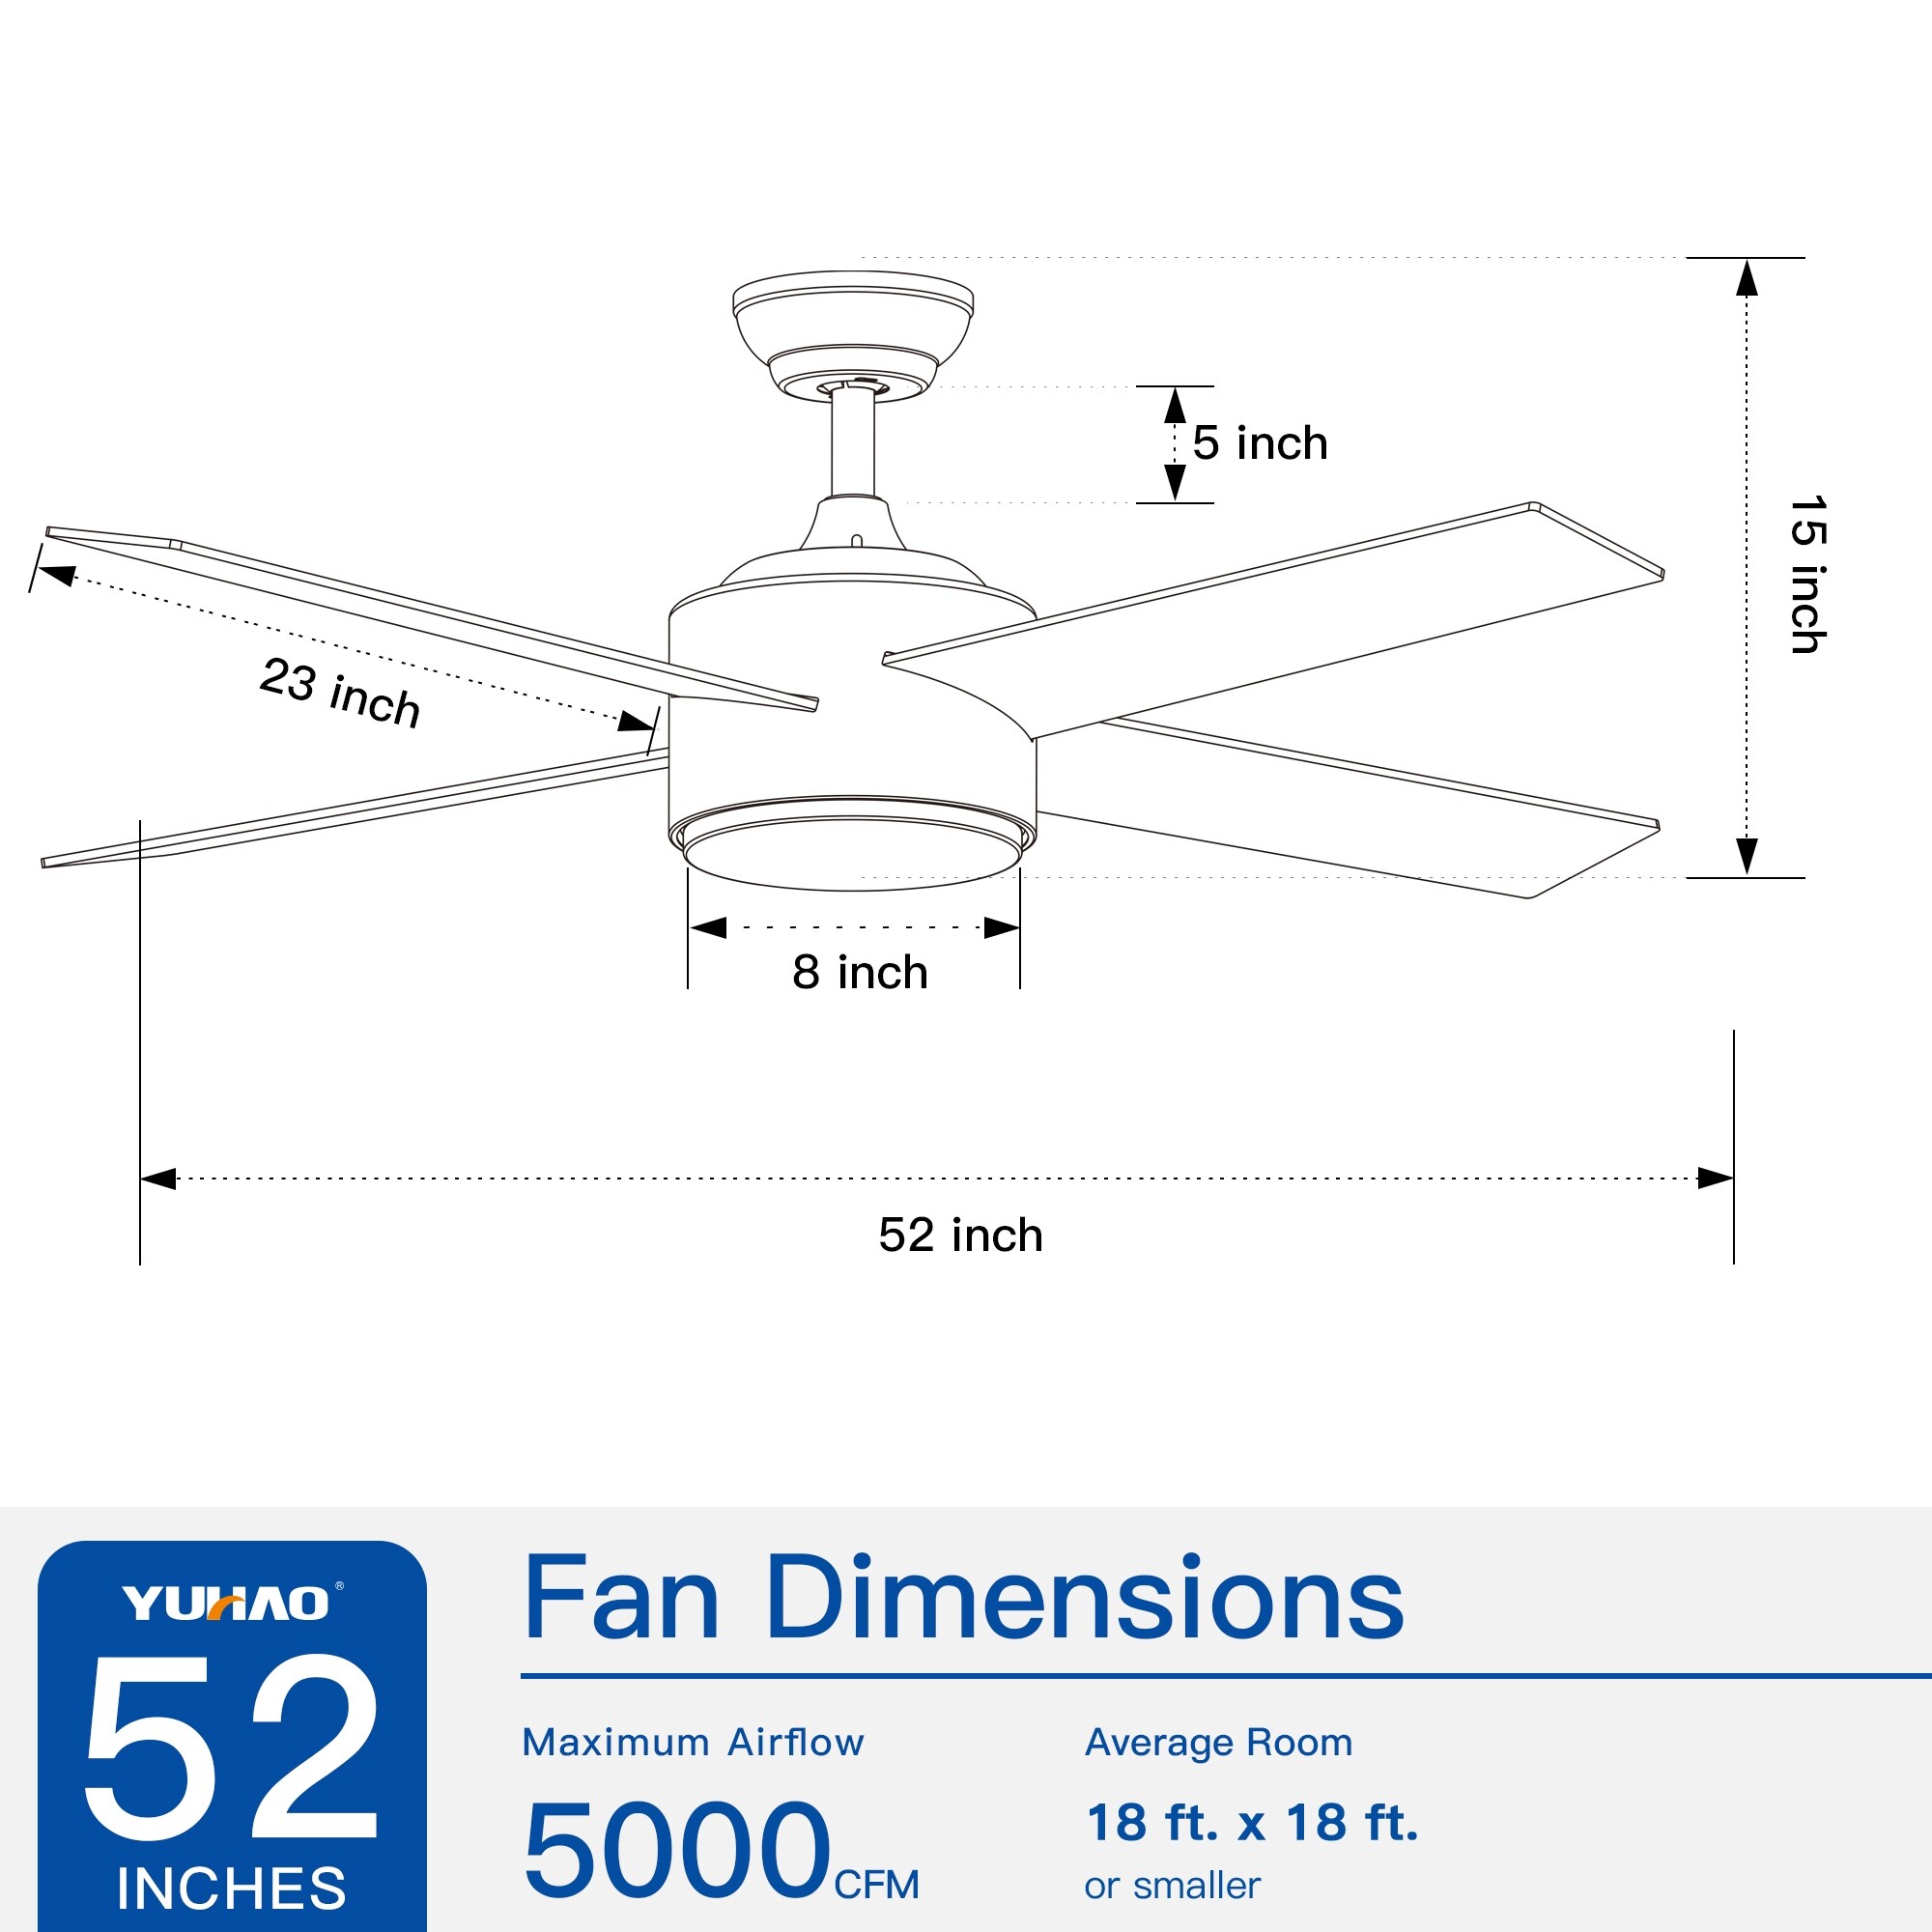 52 in. Integrated LED Indoor Black Ceiling Fan with 5 ABS Blades